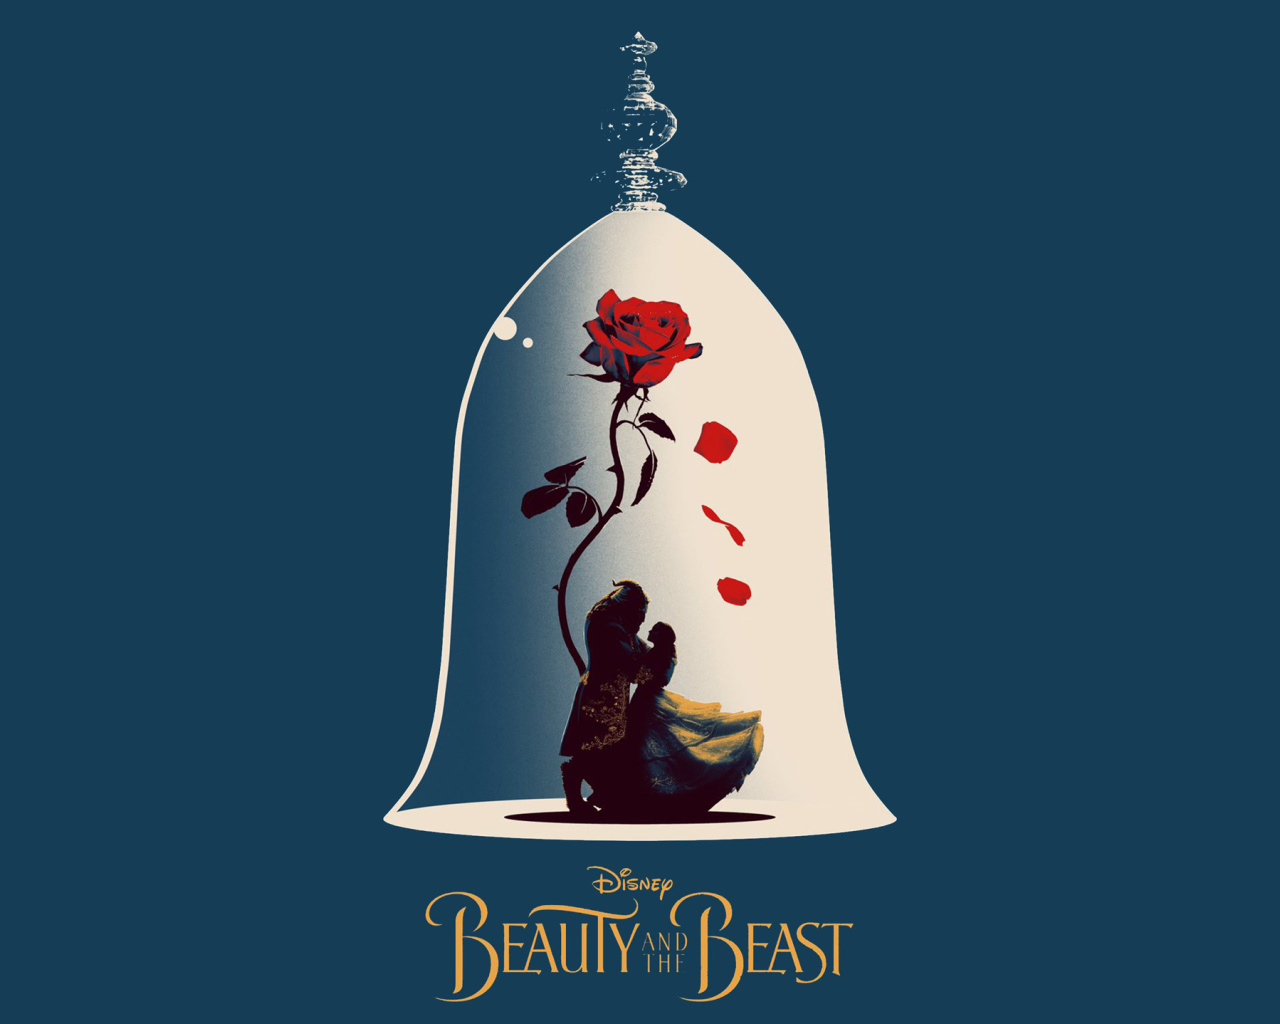 Das Beauty and the Beast Poster Wallpaper 1280x1024